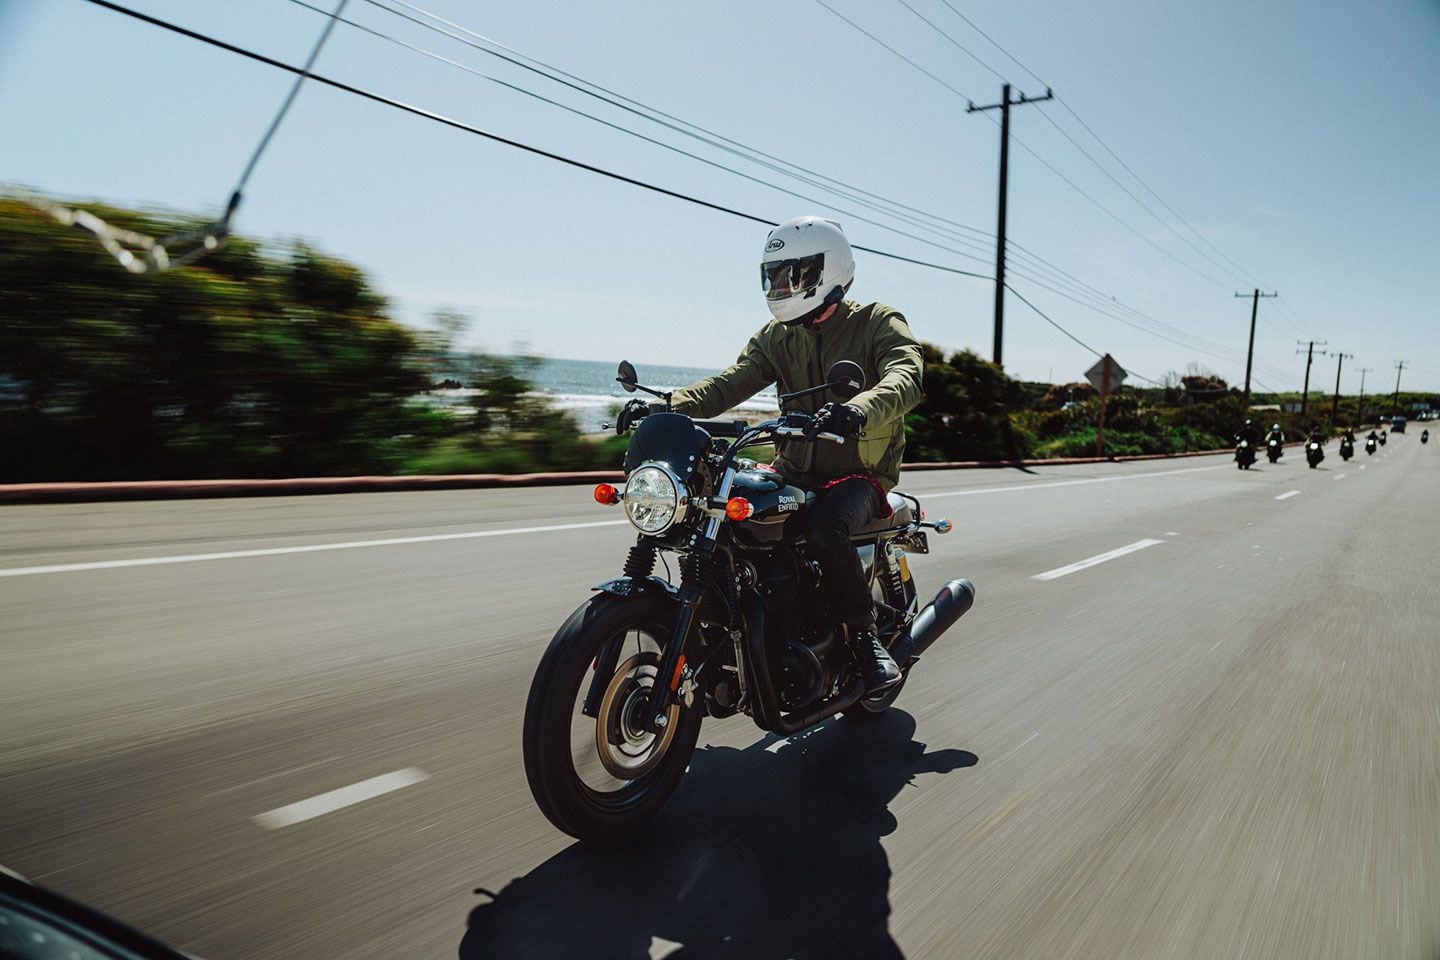 With stop-and-go traffic, speed limits around 60 mph, and beautiful views throughout, Pacific Coast Highway proved an excellent road to experience the best that these 650cc models have to offer.